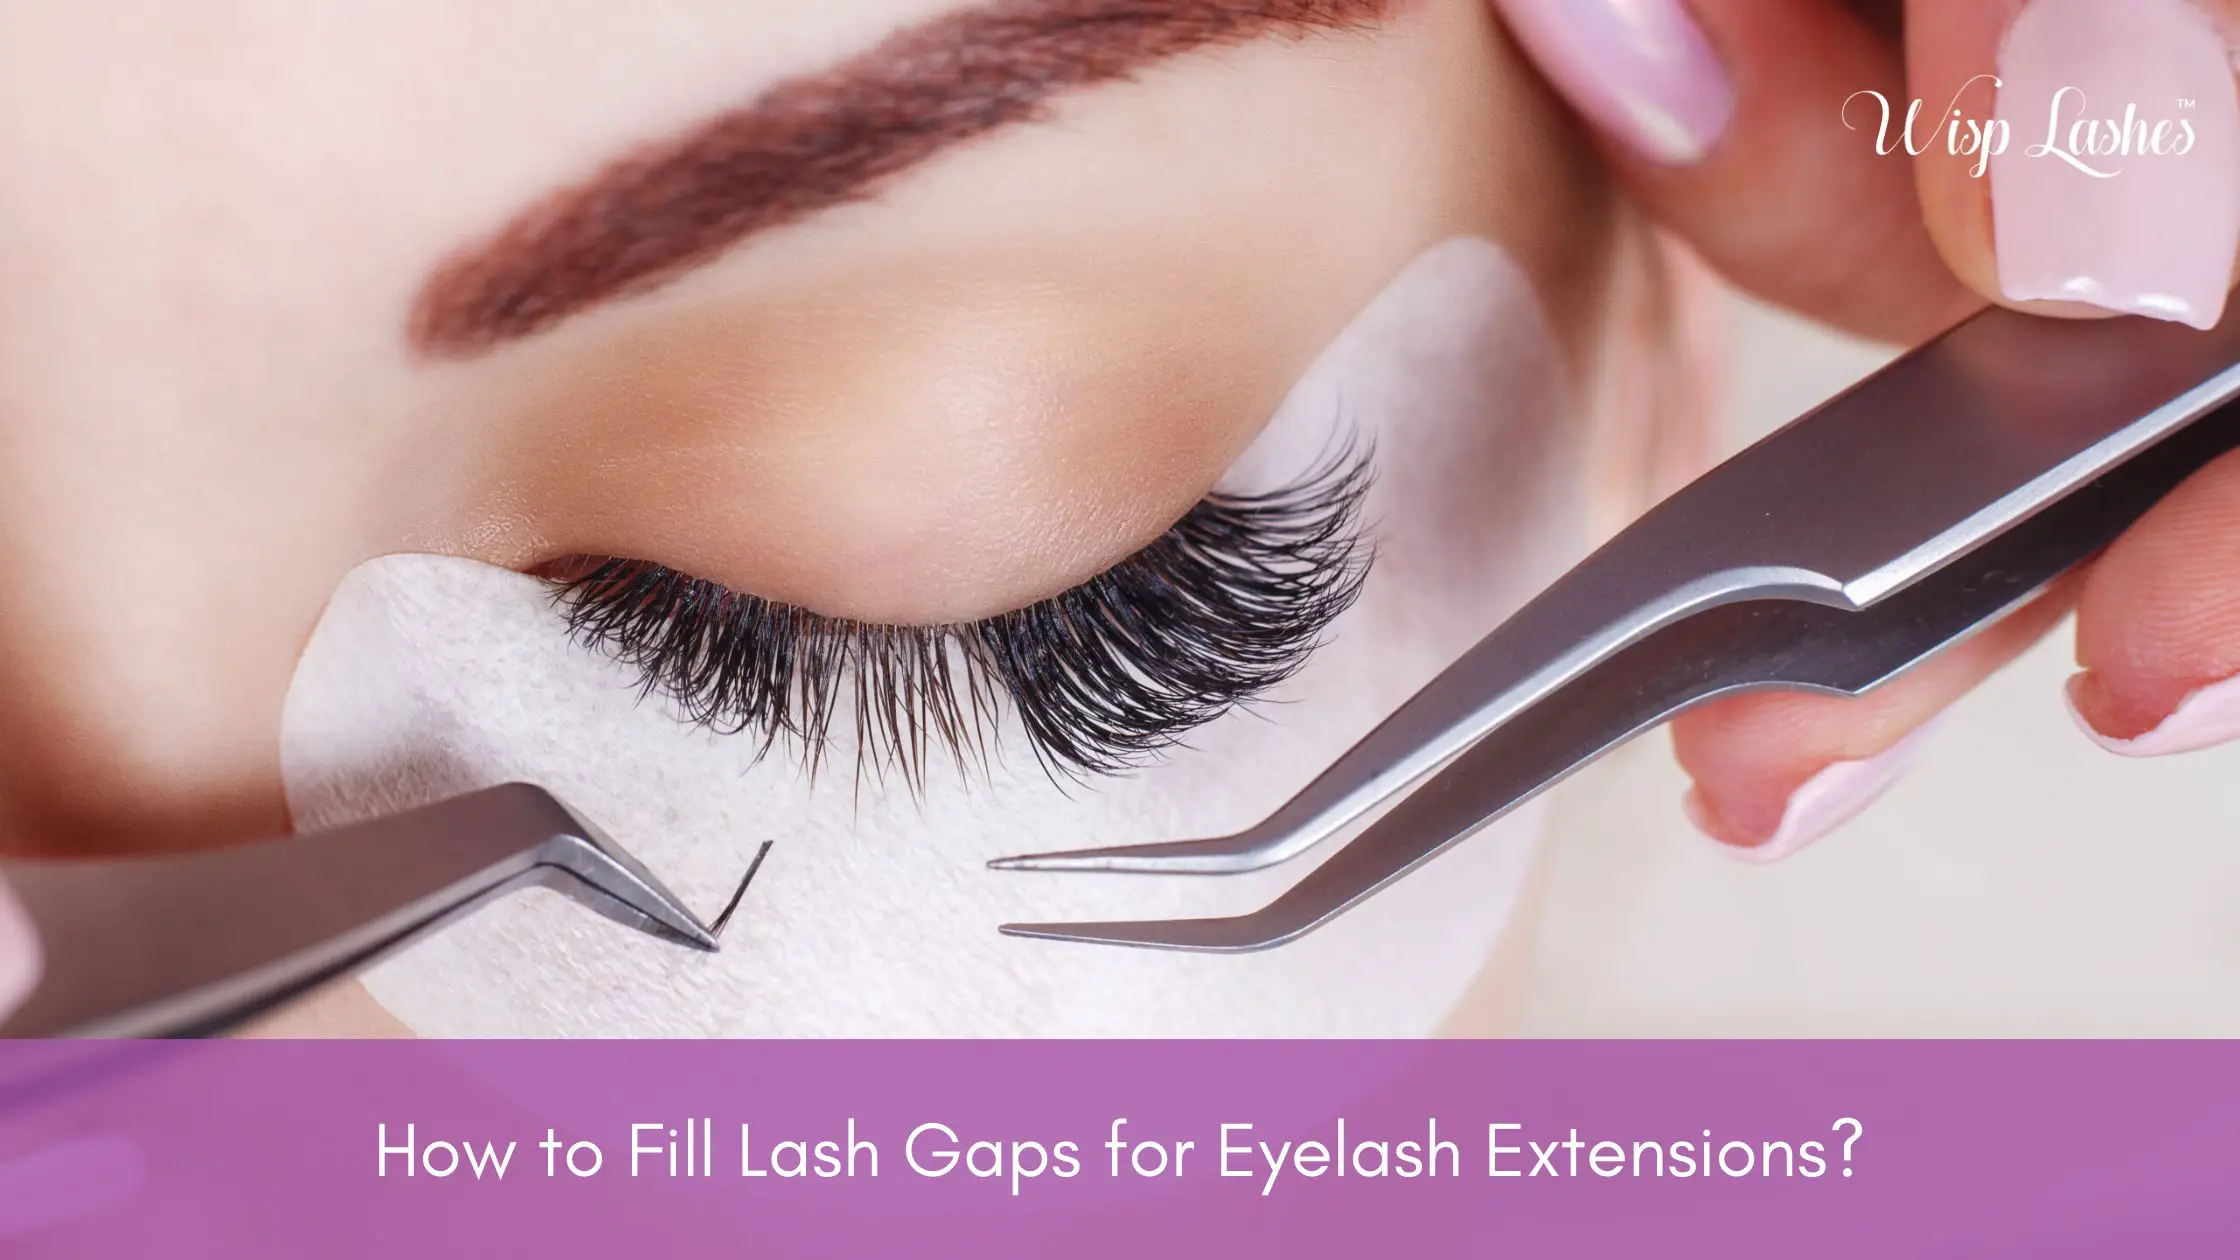 How to Fill Lash Gaps for Eyelash Extensions